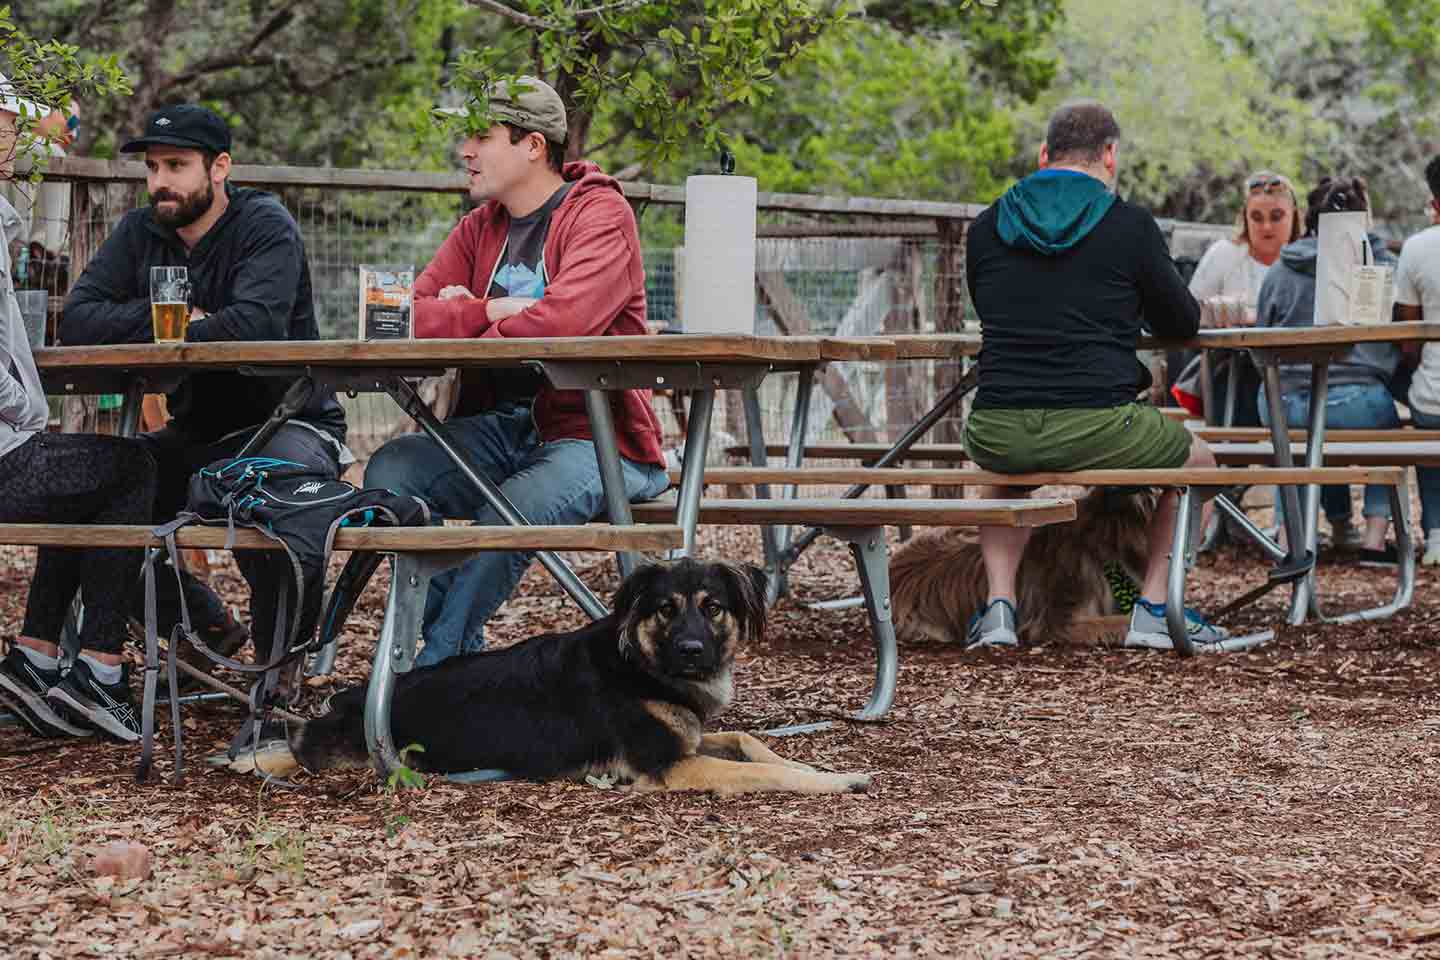 People sit outside at picnic tables and drink beer. A dog lays on the ground beneath one of the tables